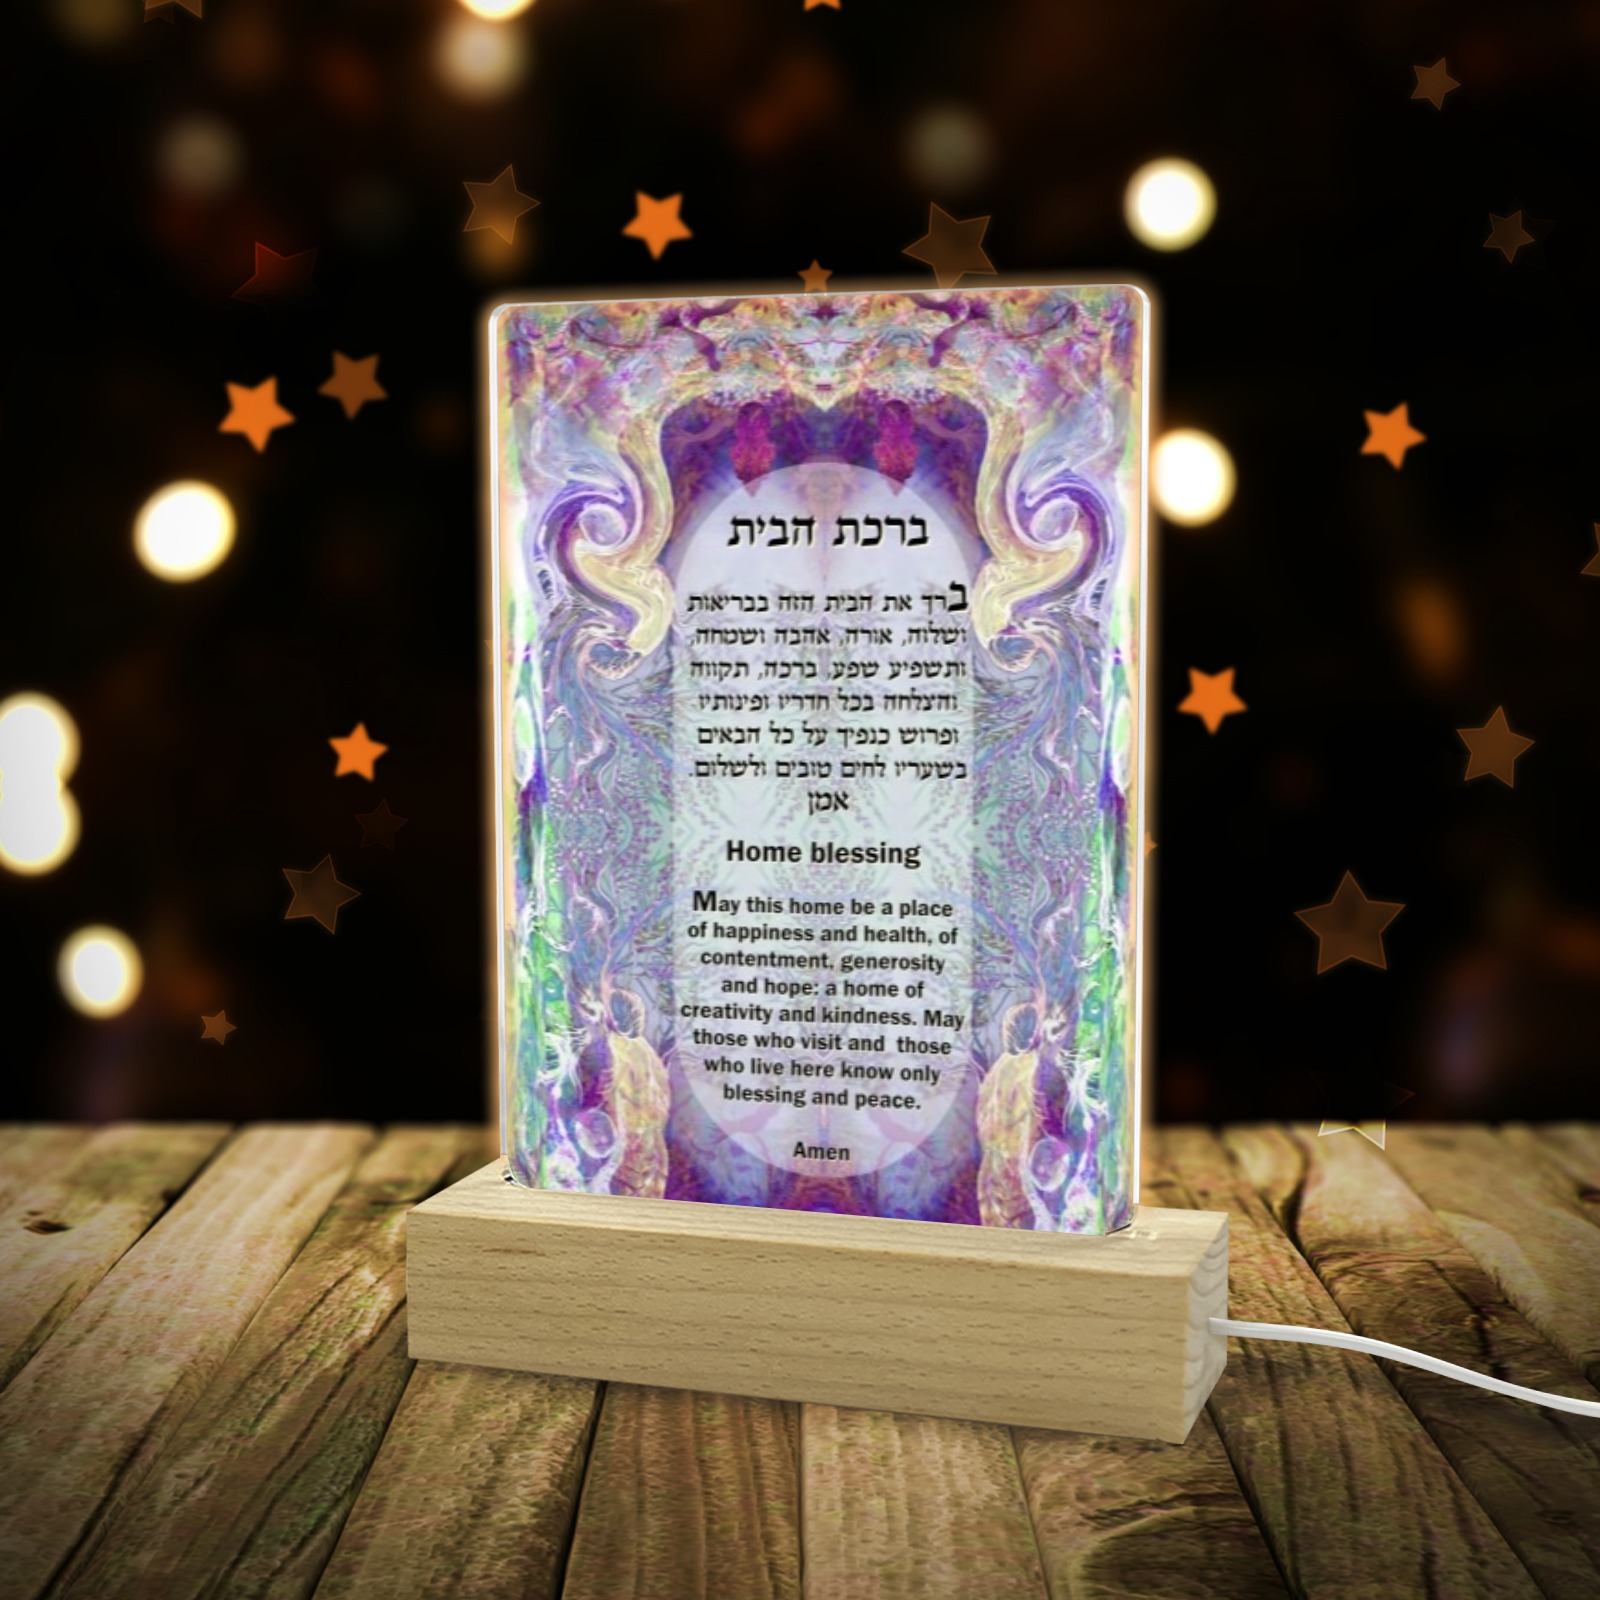 home blessing Hebrew English 17x17-3 Acrylic Photo Print with Colorful Light Square Base 5"x7.5"